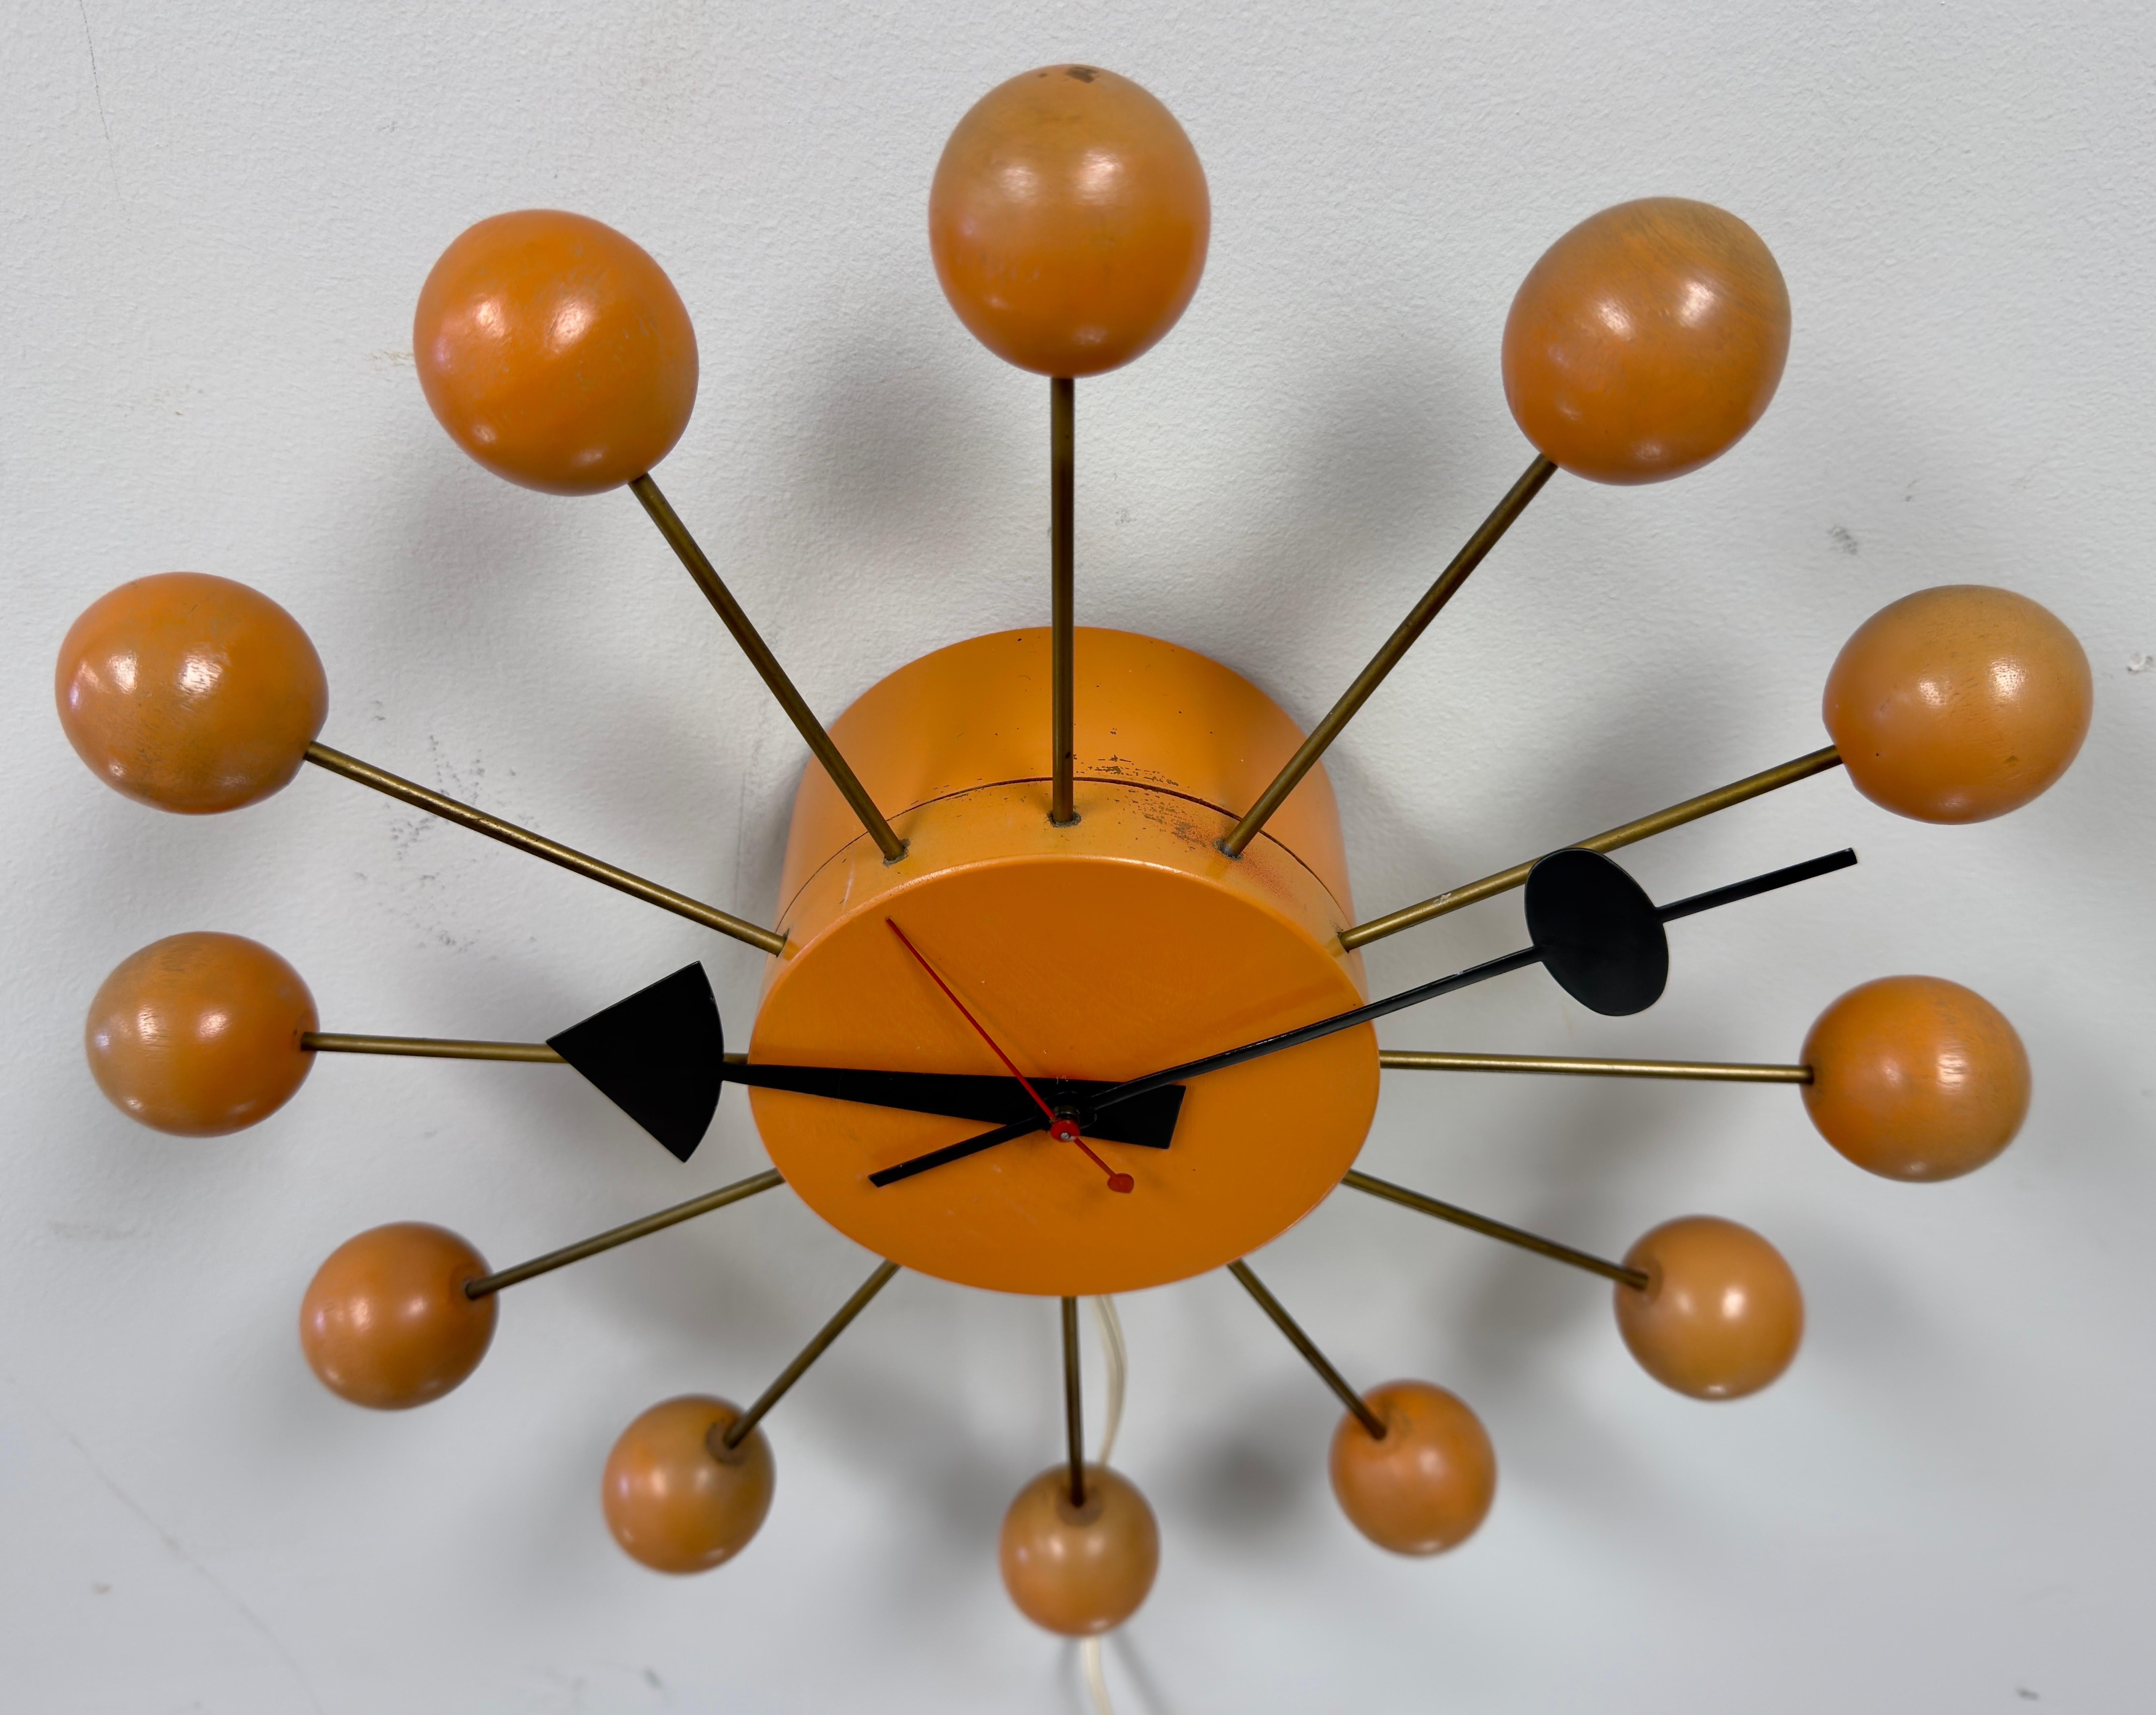 Rare Mid Century Modern George Nelson Orange Ball Clock Model 4755 In Good Condition For Sale In Plainview, NY